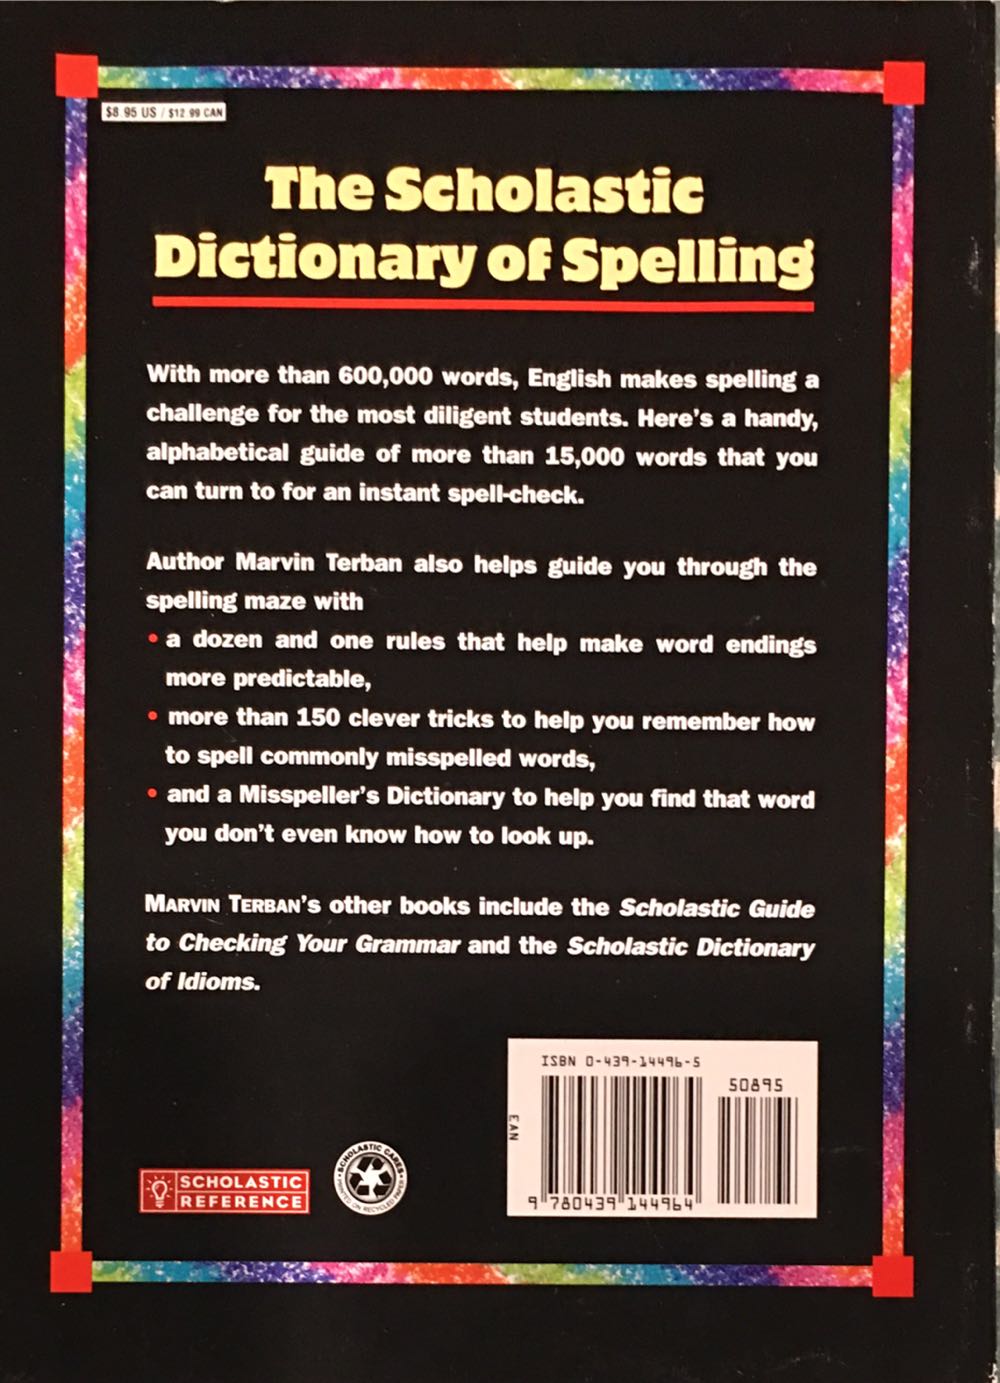 Scholastic Dictionary Of Spelling - Marvin Terban (Scholastic Reference - Trade Paperback) book collectible [Barcode 9780439144964] - Main Image 2